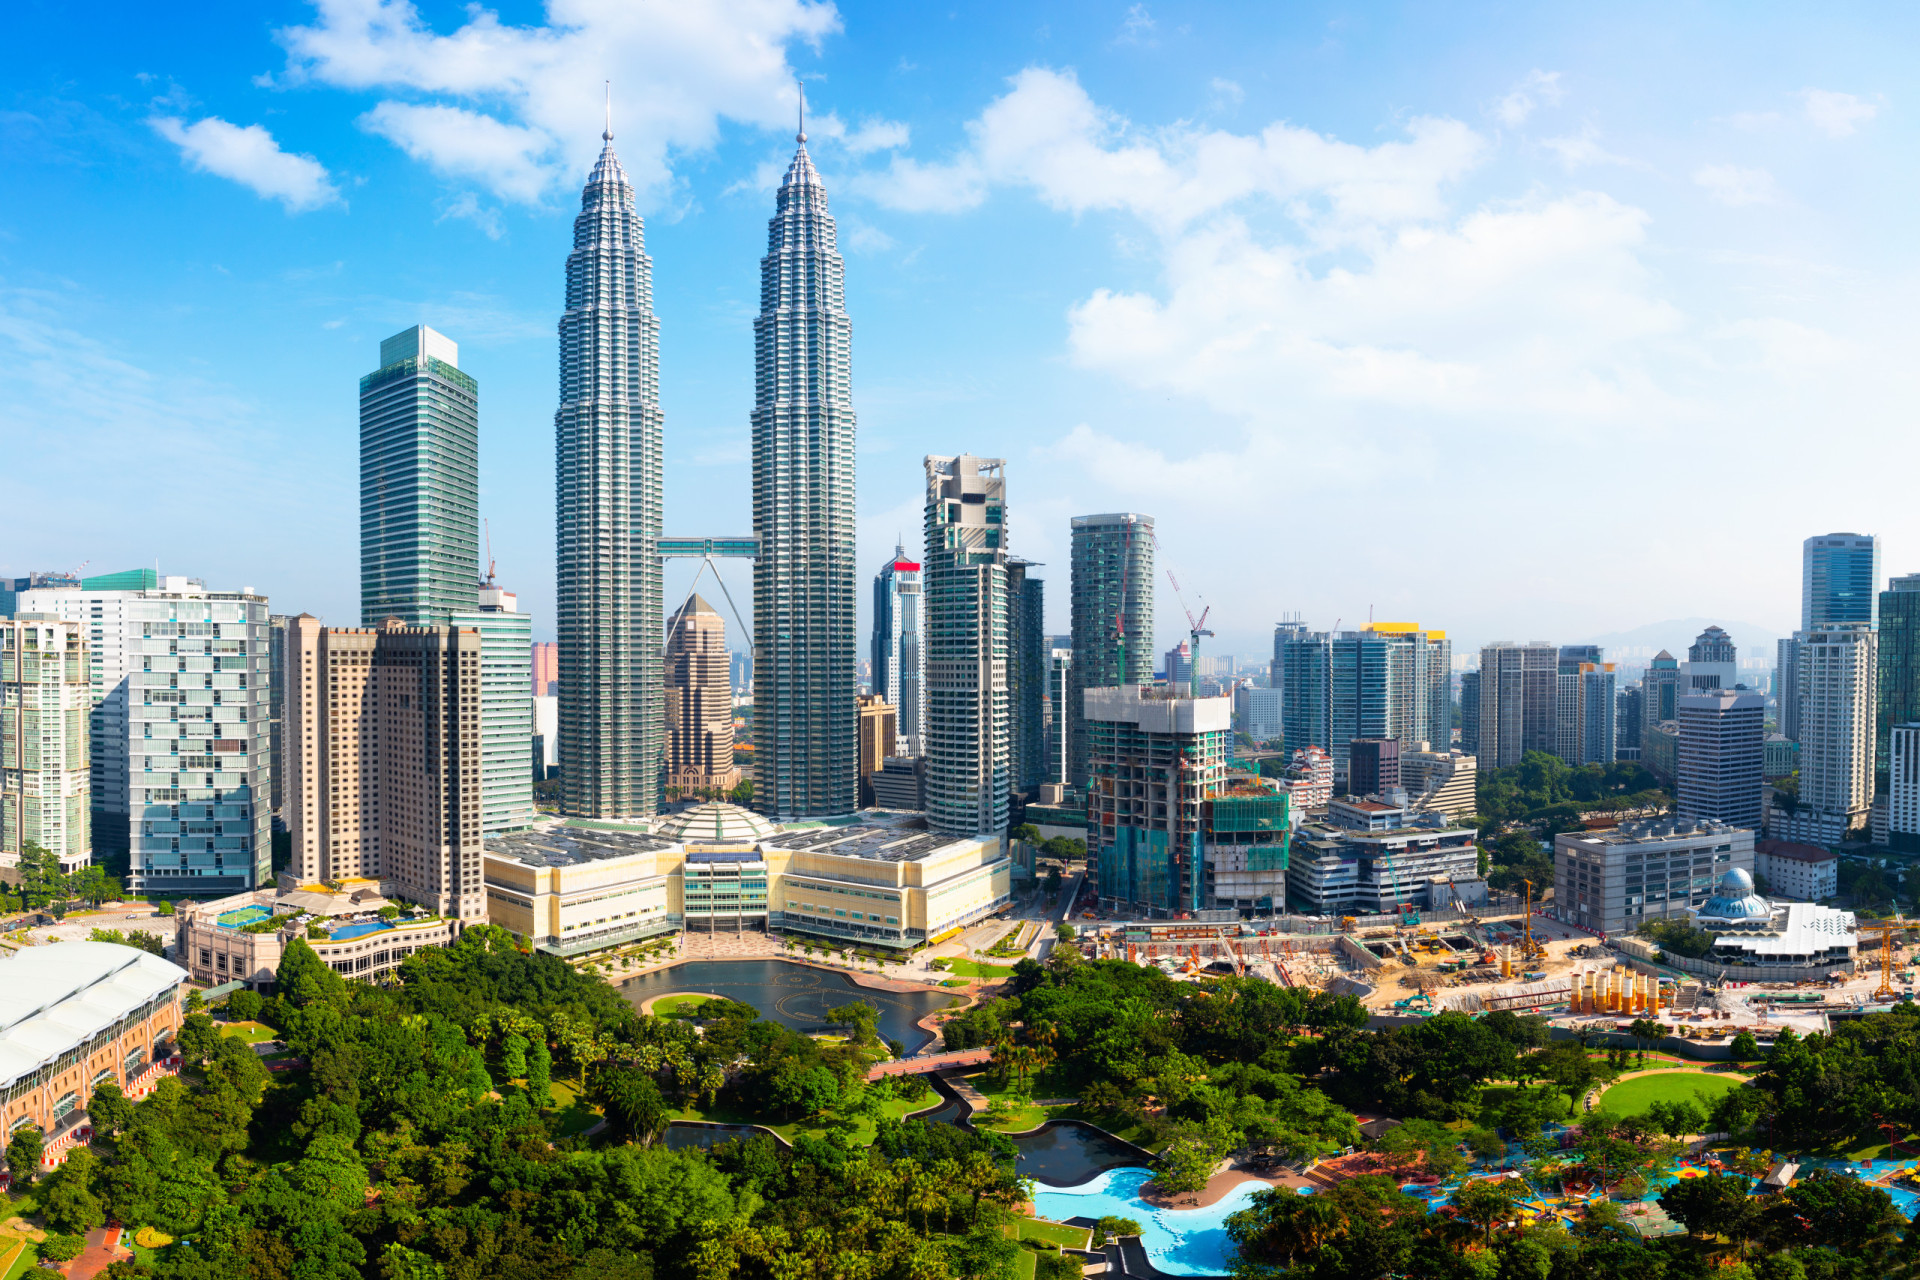 <p>Malaysia has a flat-rate tax that it applies to each night you stay, at around US$4.35 a night.</p><p><a href="https://www.msn.com/en-my/community/channel/vid-7xx8mnucu55yw63we9va2gwr7uihbxwc68fxqp25x6tg4ftibpra?cvid=94631541bc0f4f89bfd59158d696ad7e">Follow us and access great exclusive content every day</a></p>